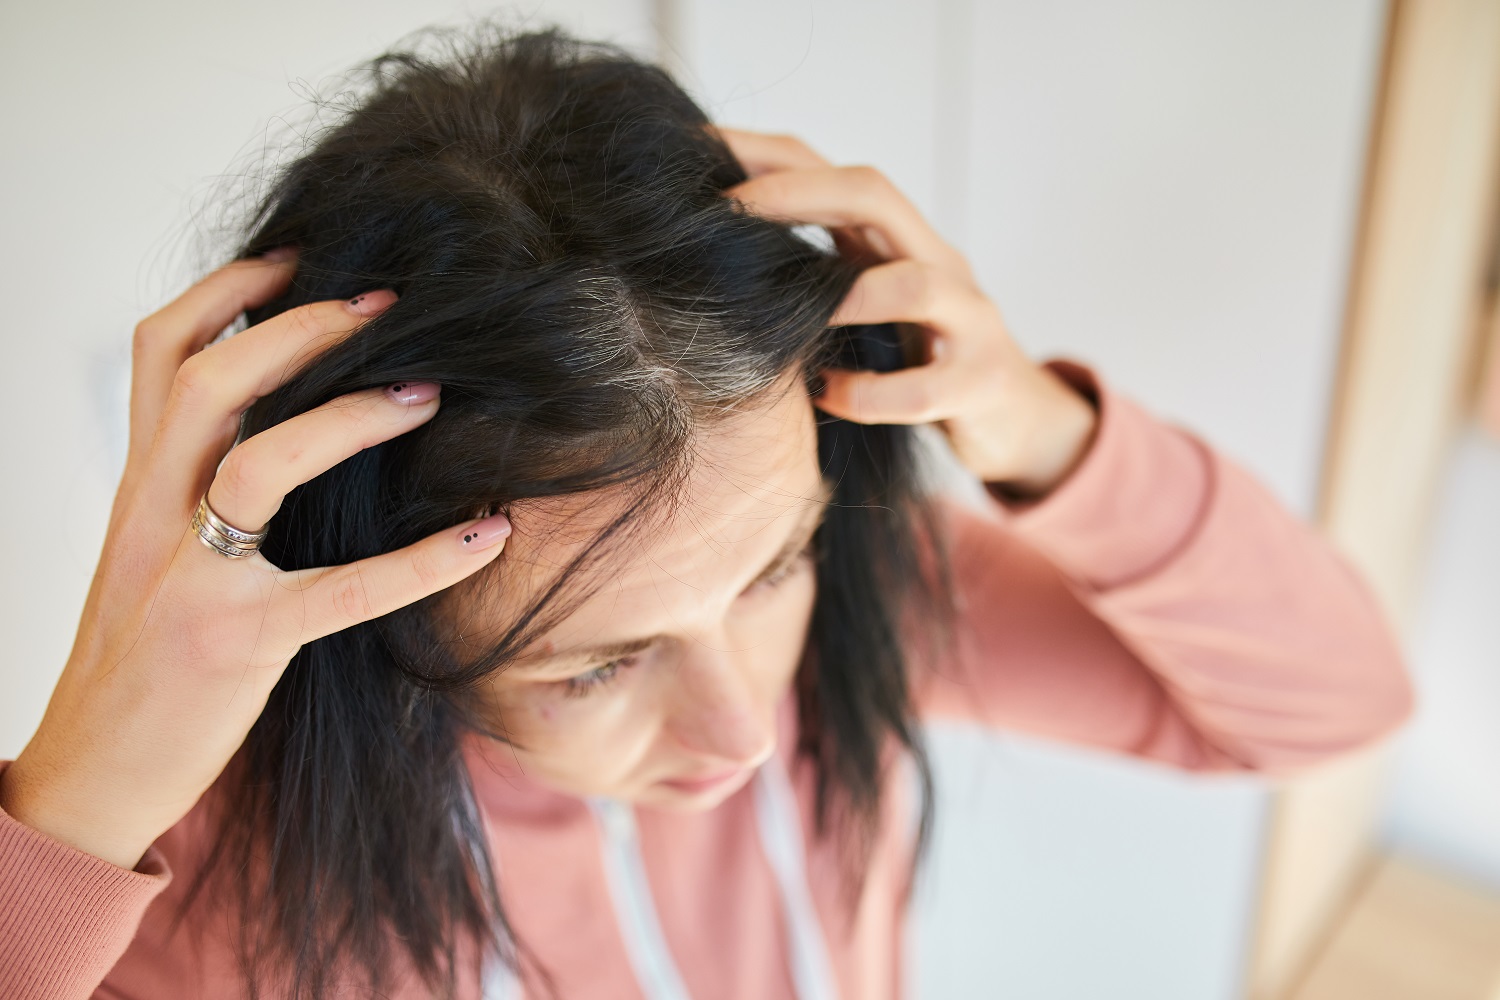 Fungal Infection And Hair Loss